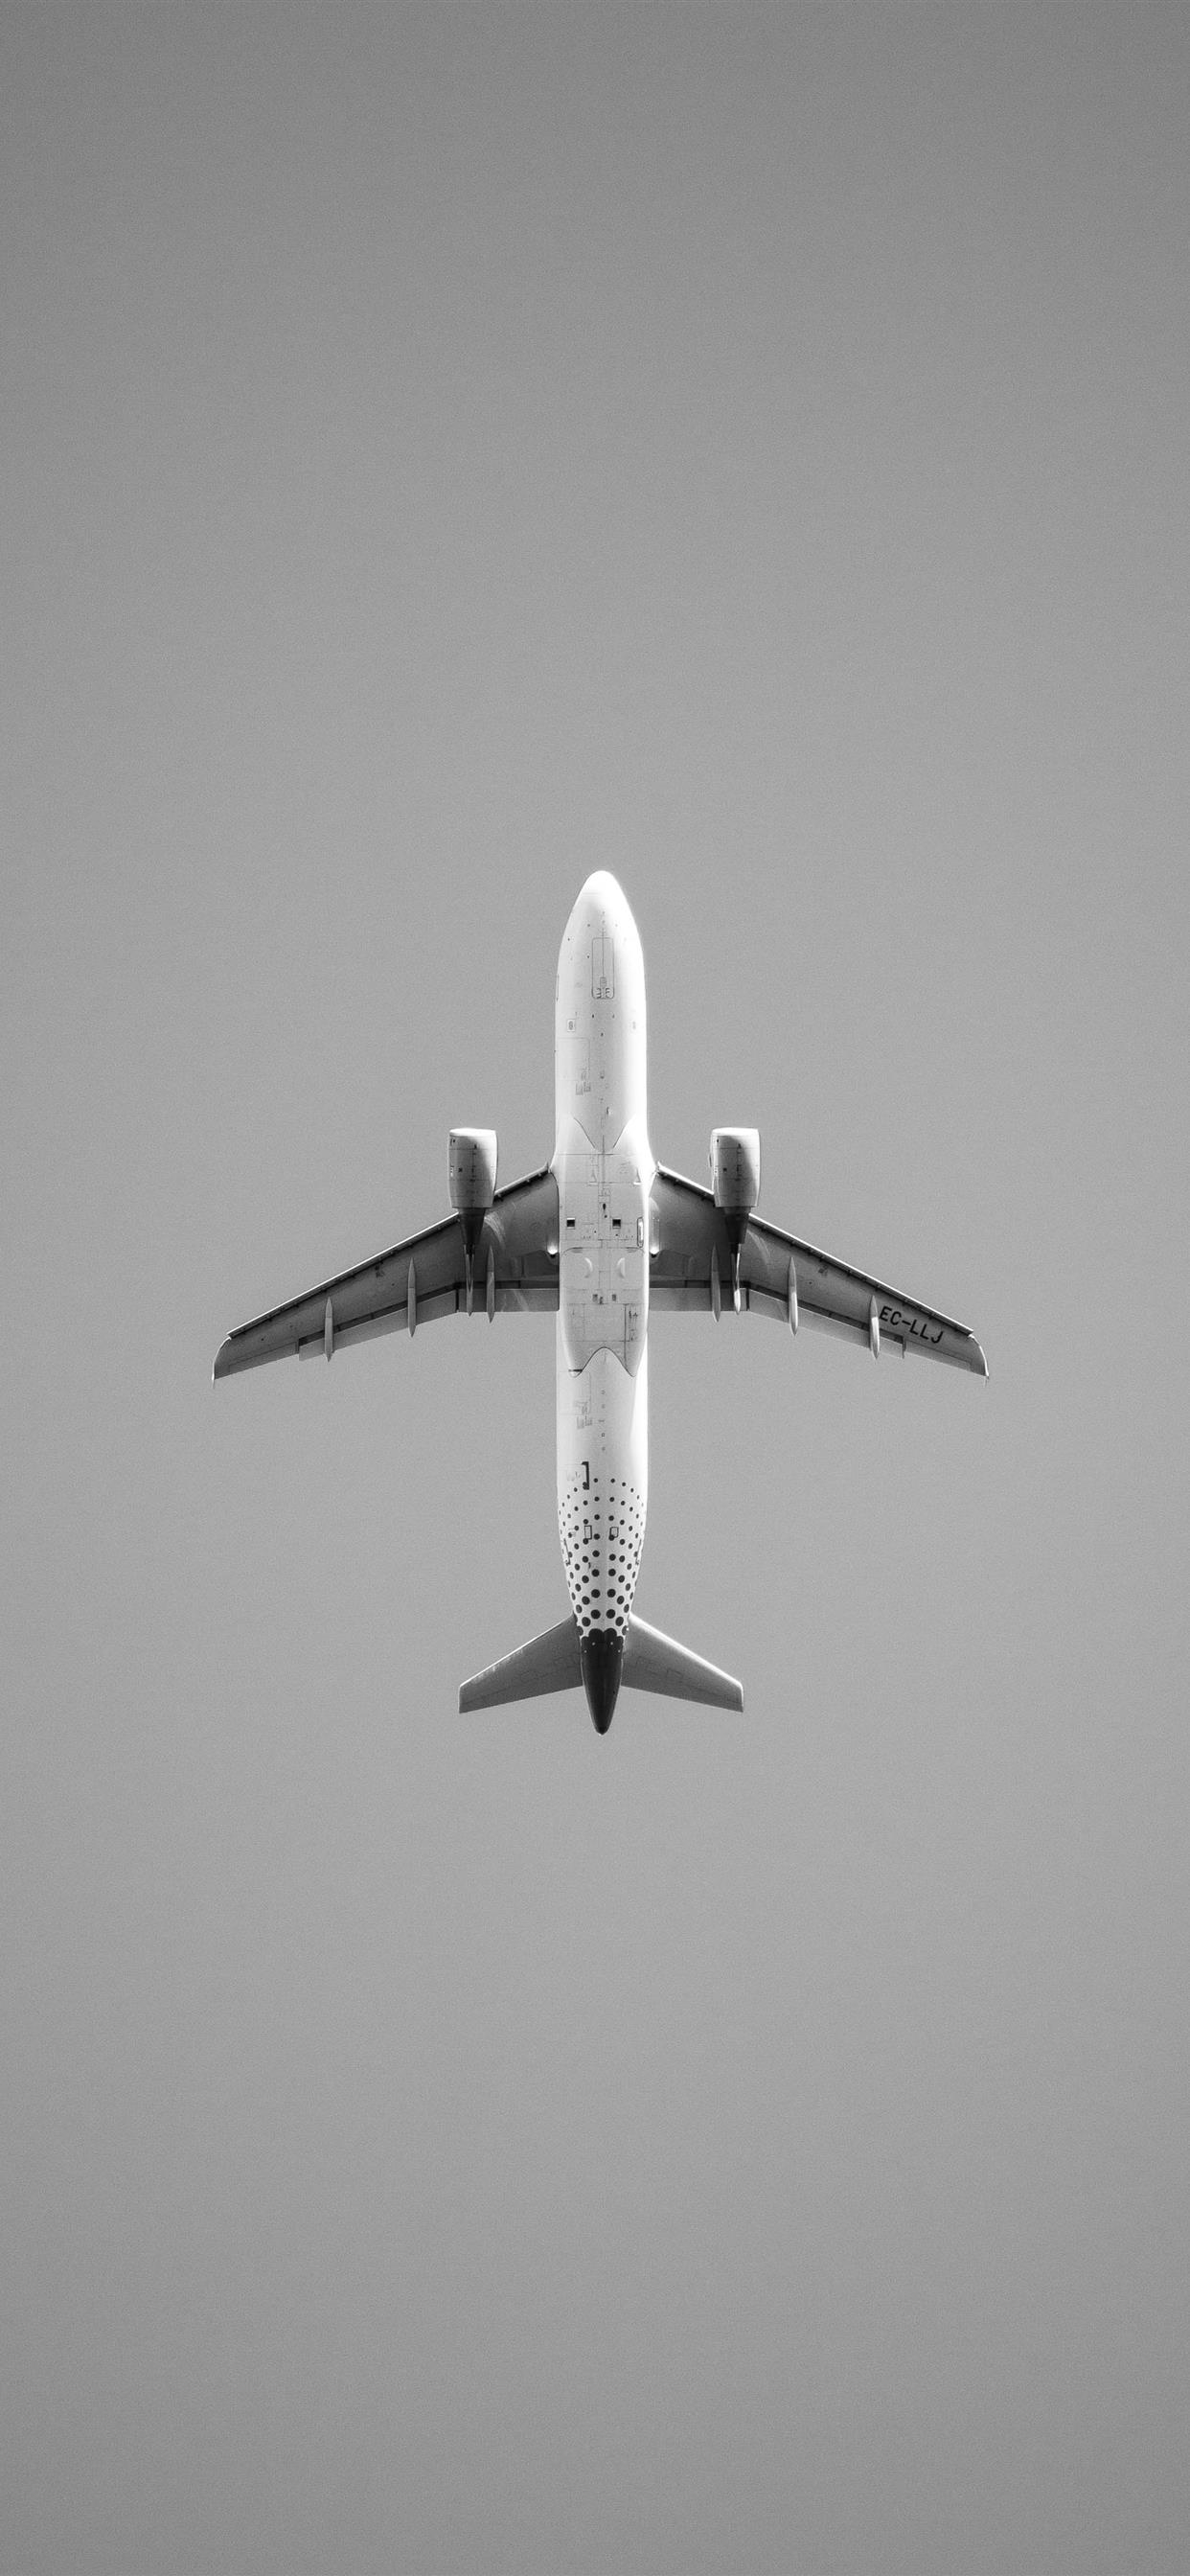 Just a plane iPhone X Wallpaper Free Download